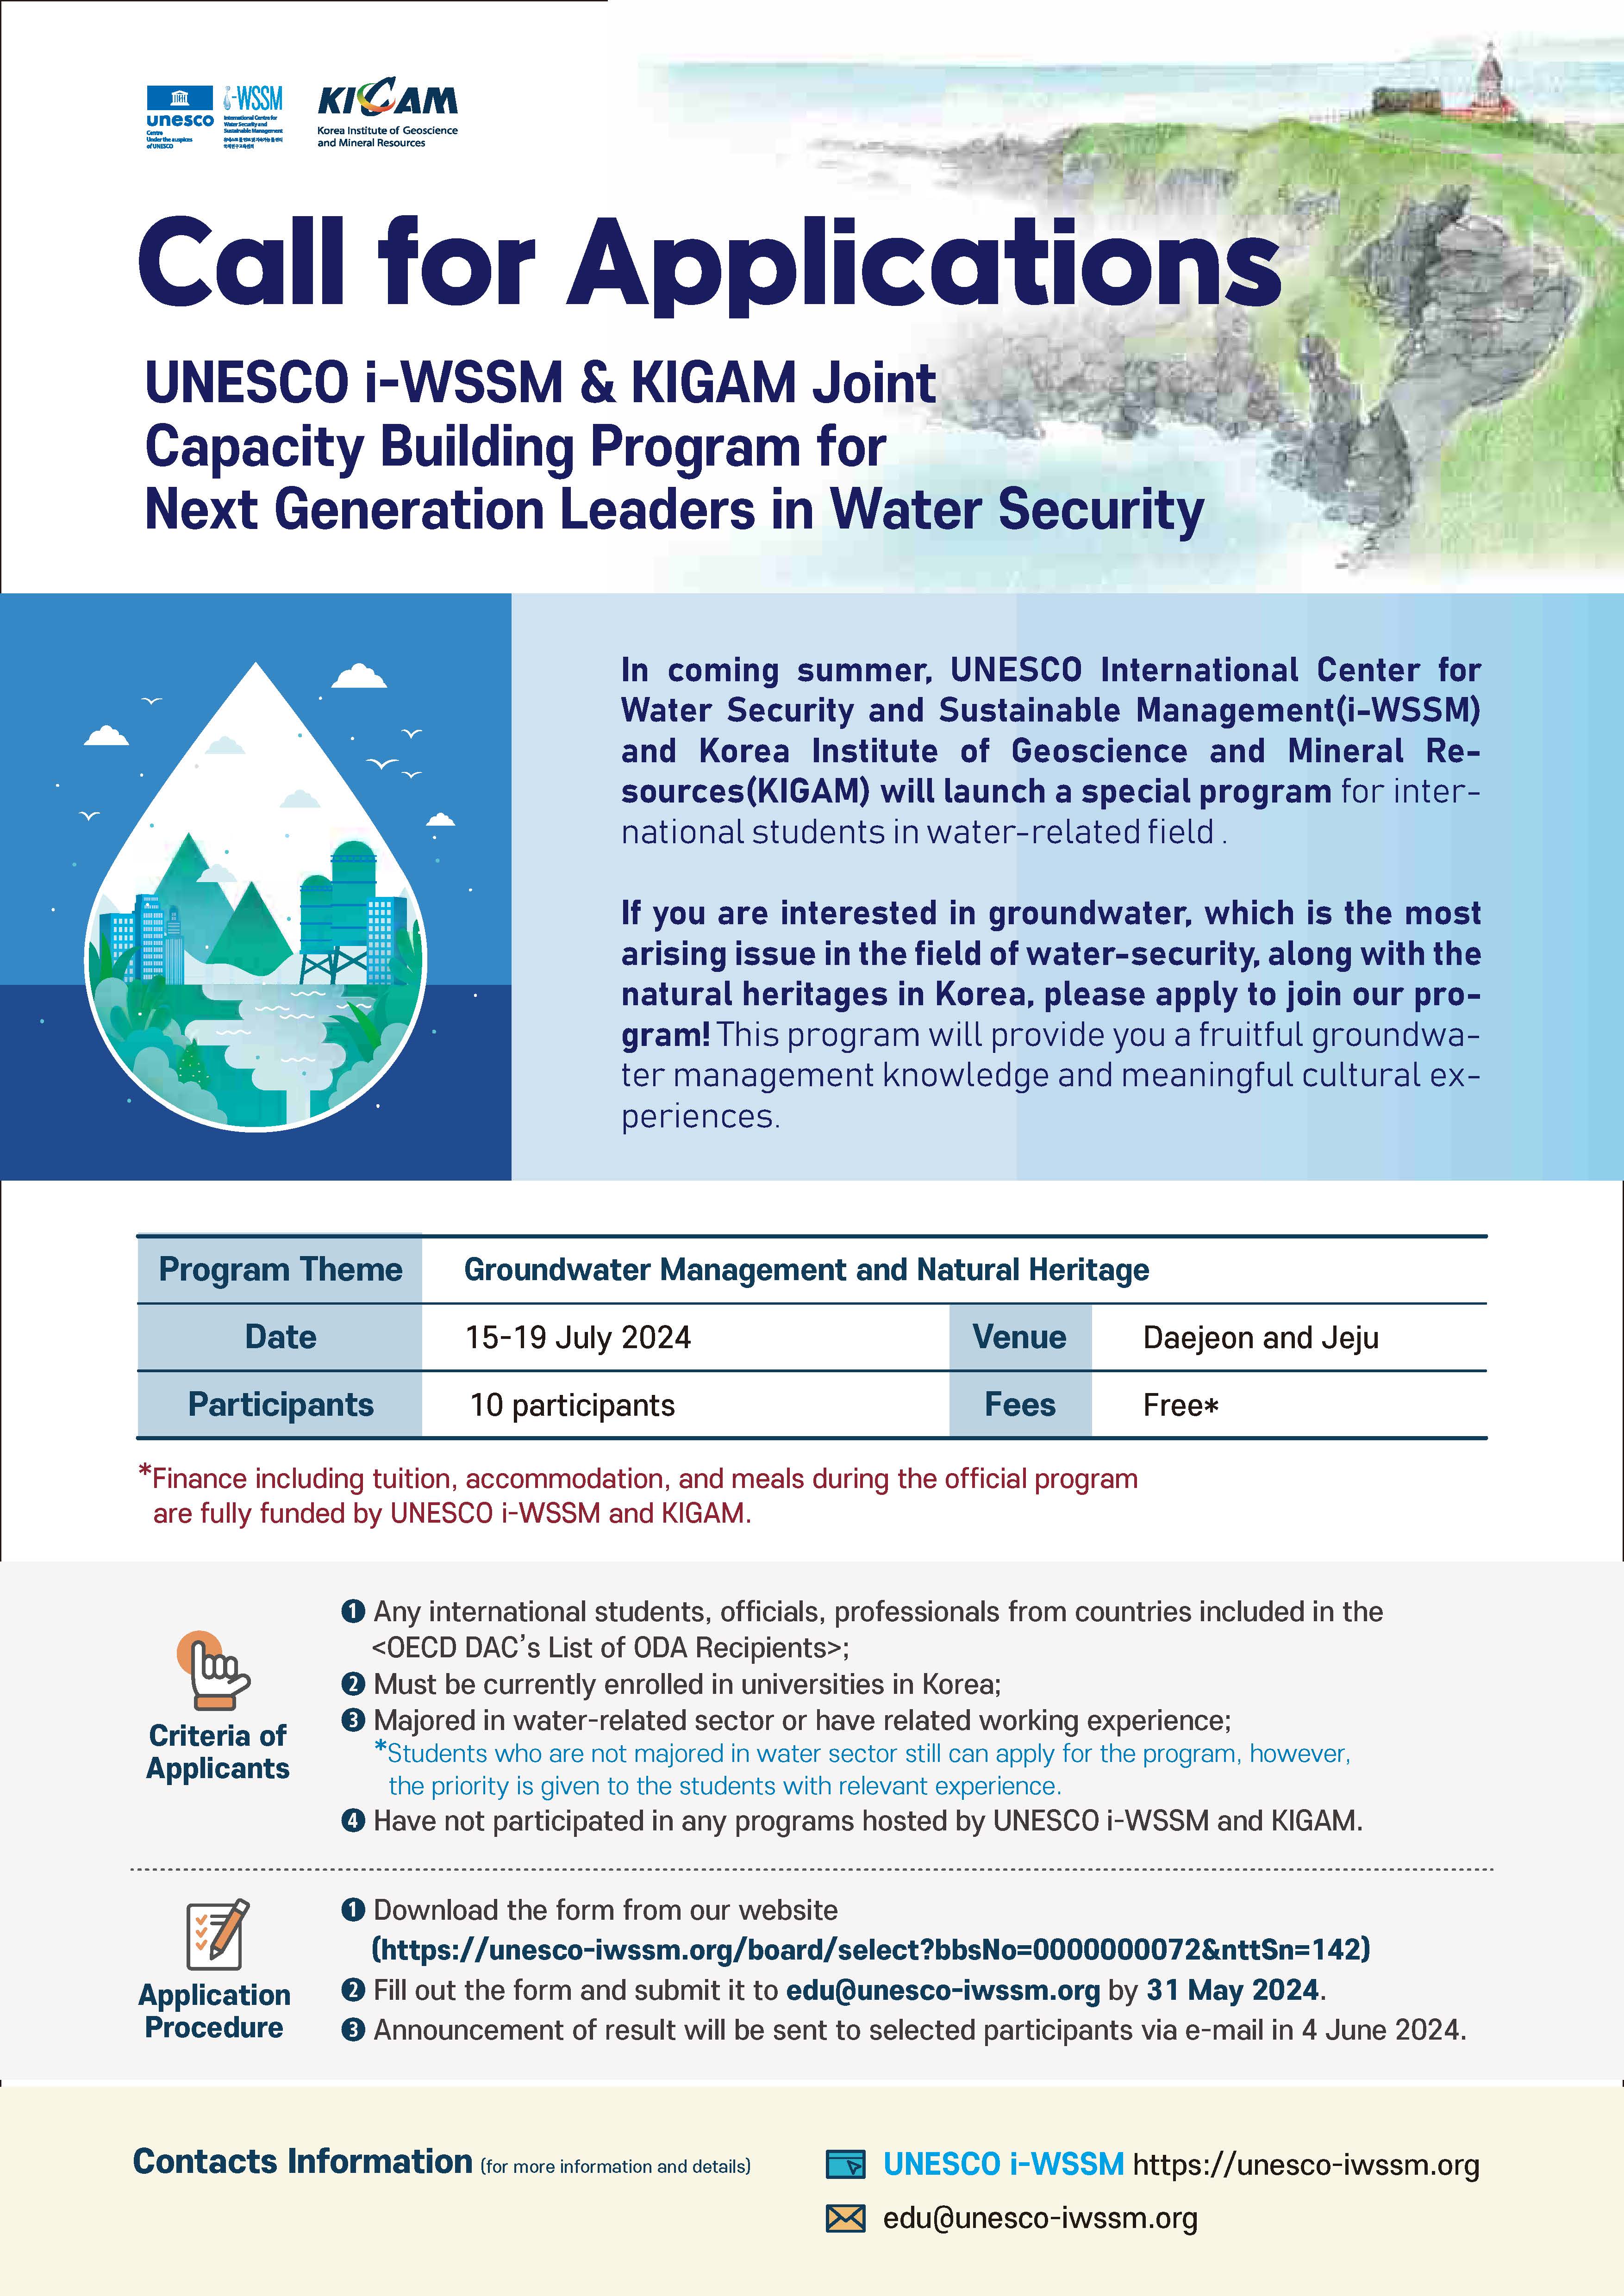 UNESCO i-WSSM and KIGAM Joint Capacity Building Program for Next-Generation Leaders in Water Security